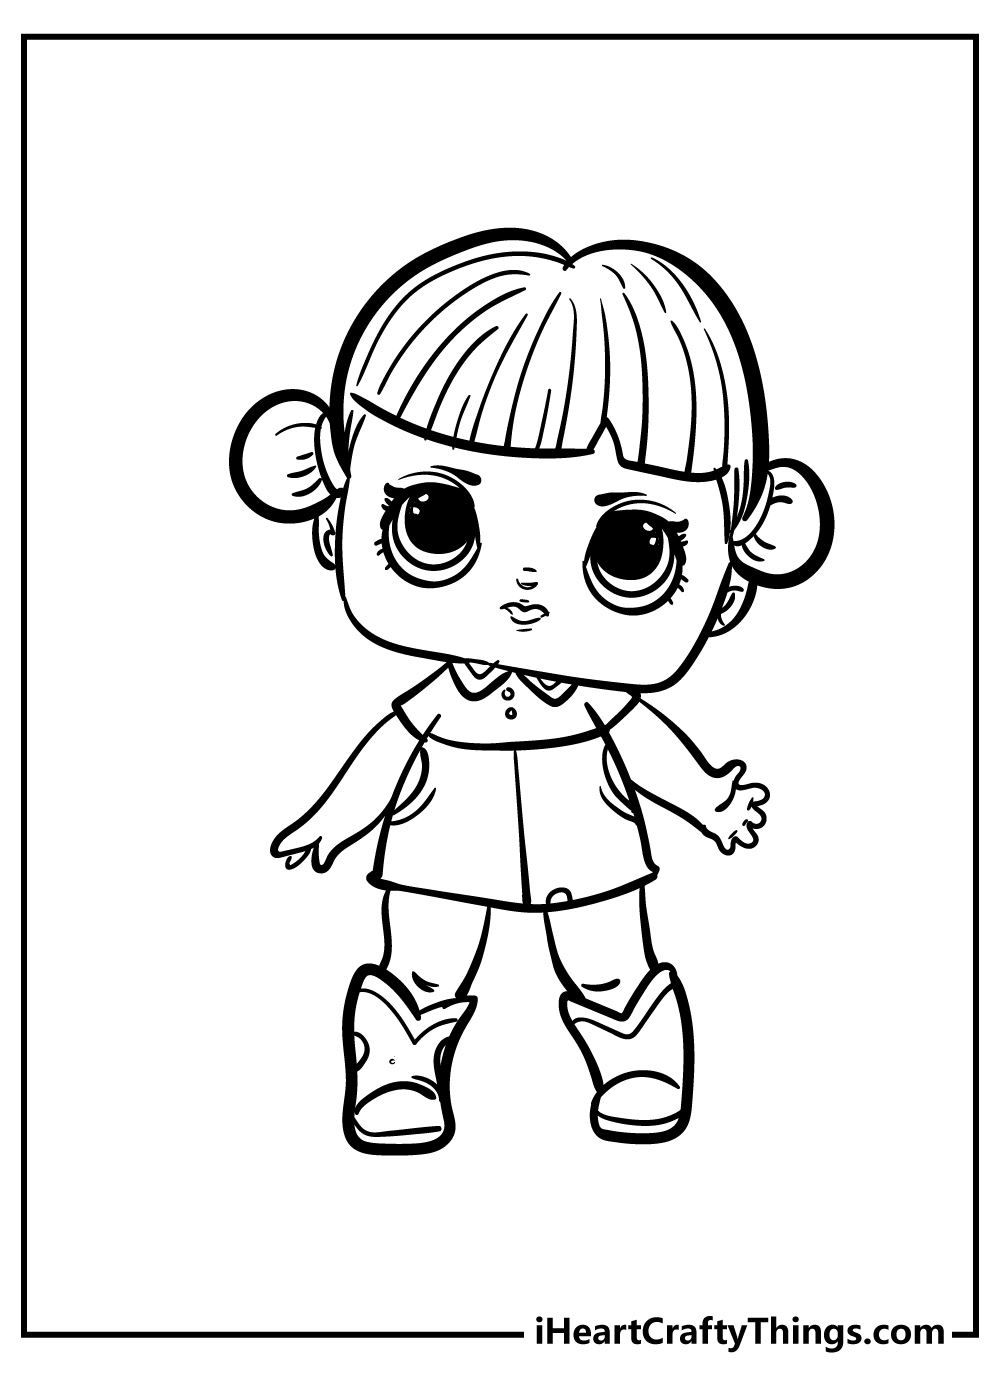 LOL doll coloring pages free printable